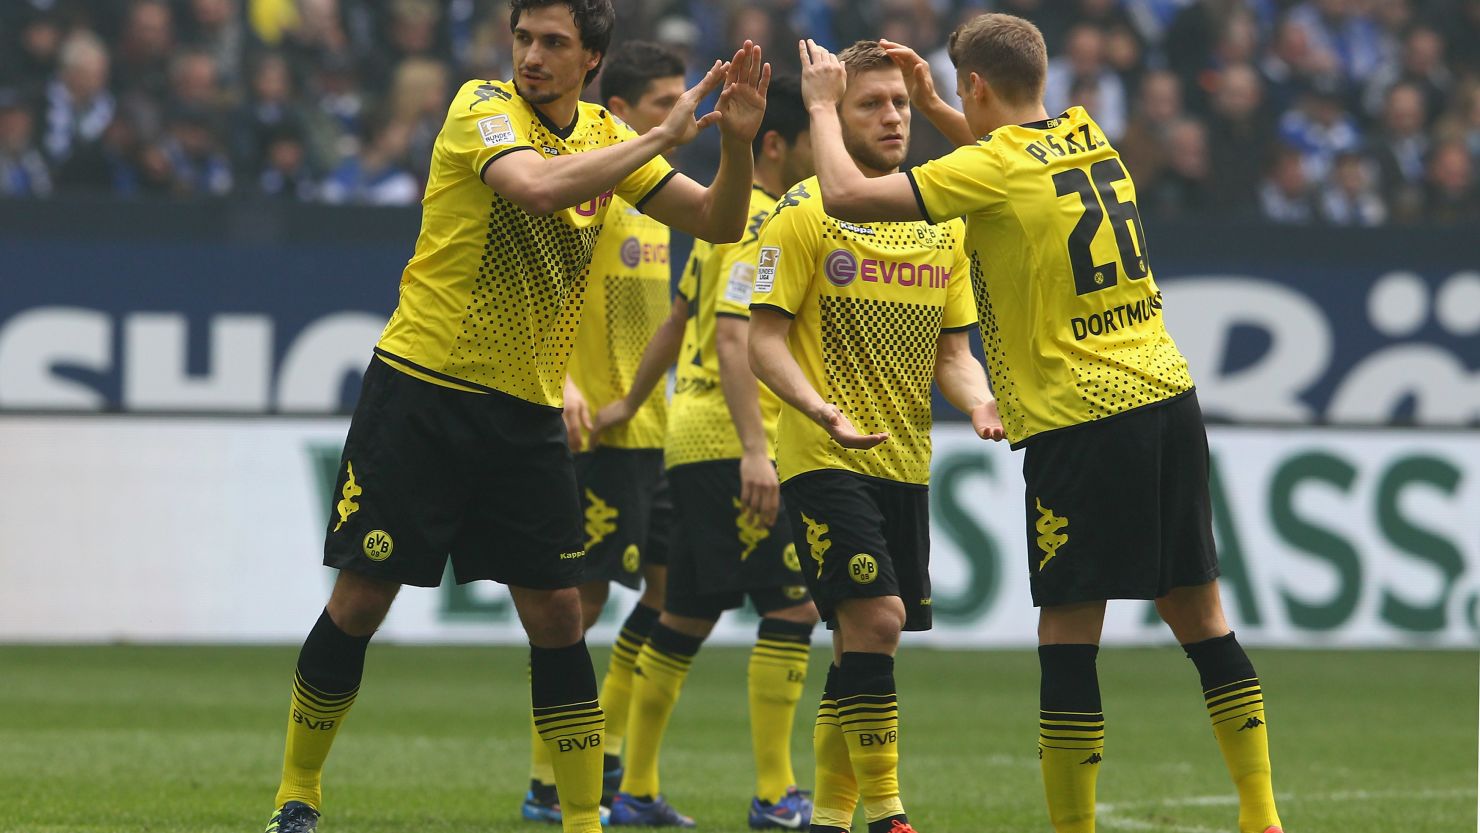 Borussia Dortmund players congratulate each other after beating Schalke on Saturday to all but seal the Bundesliga title